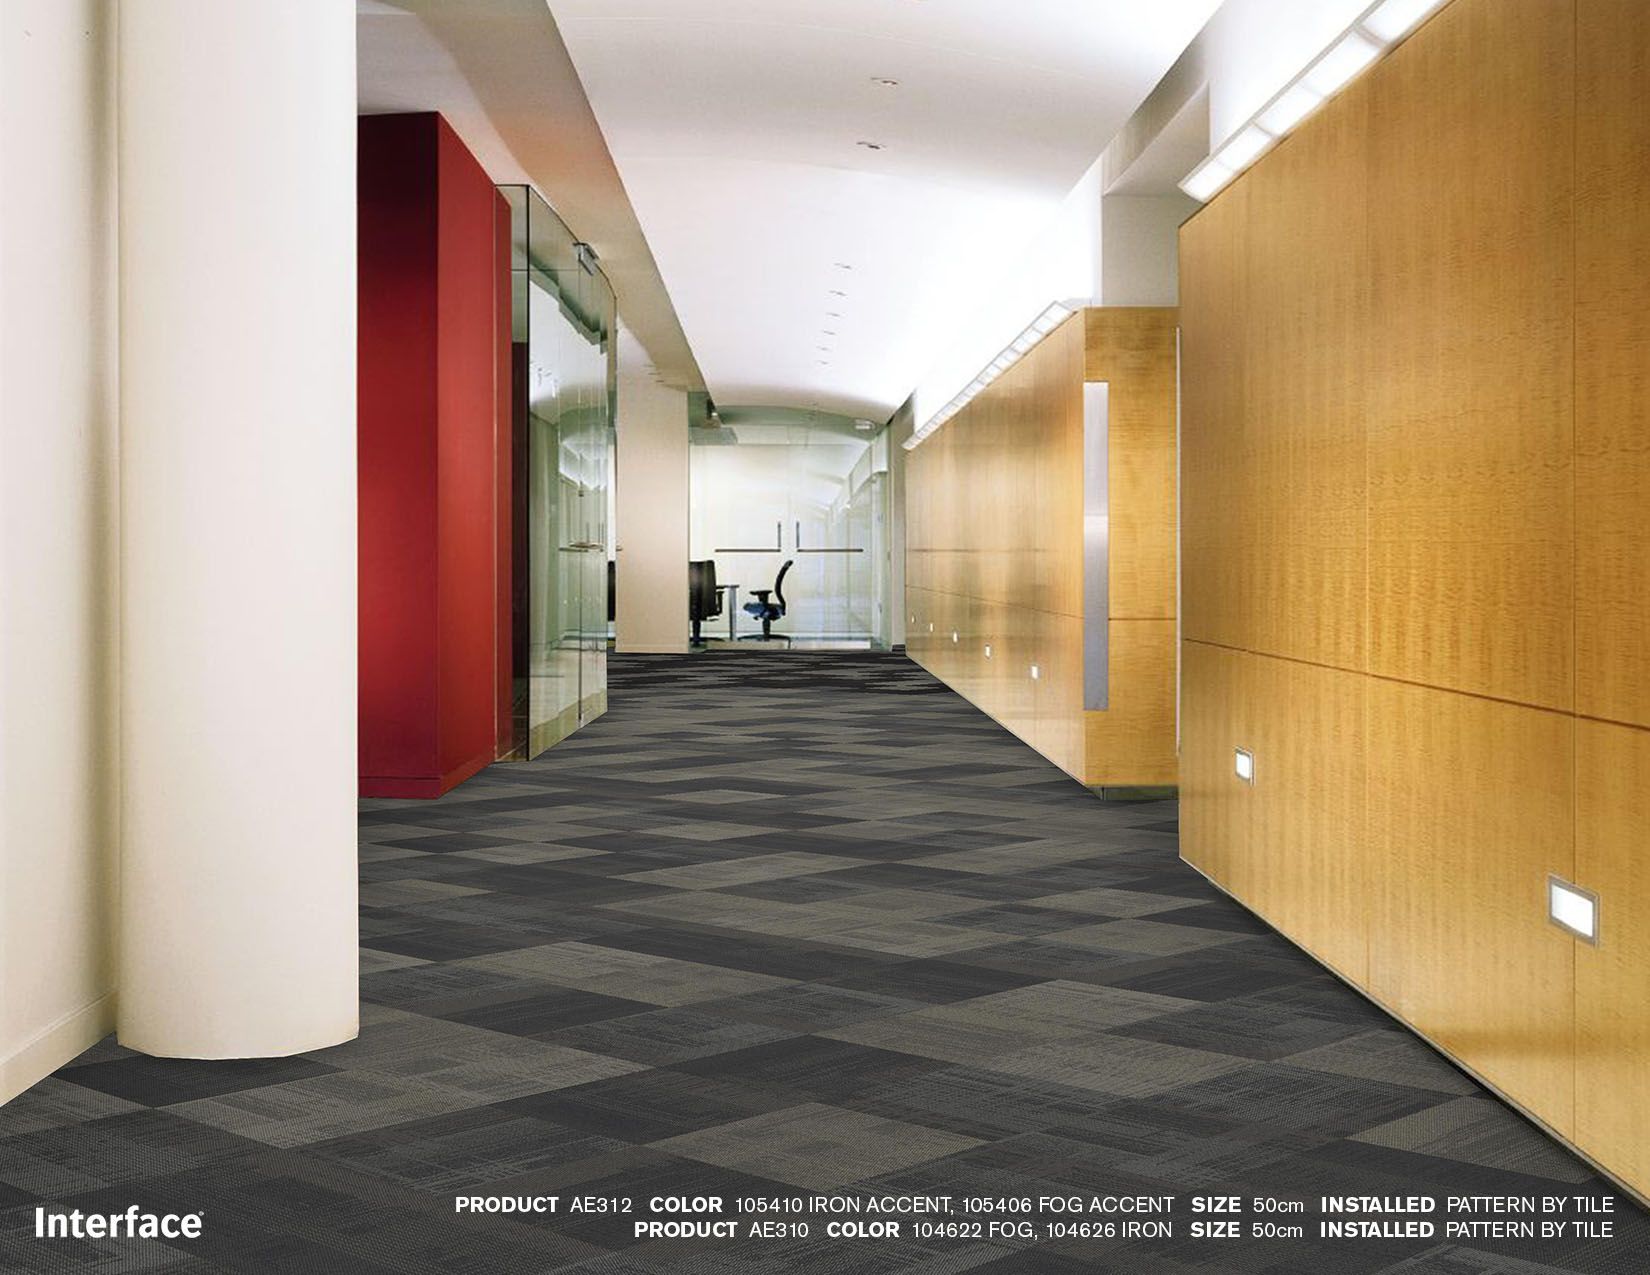 Interface SR899 and AE312 carpet tile in hallway scene image number 5